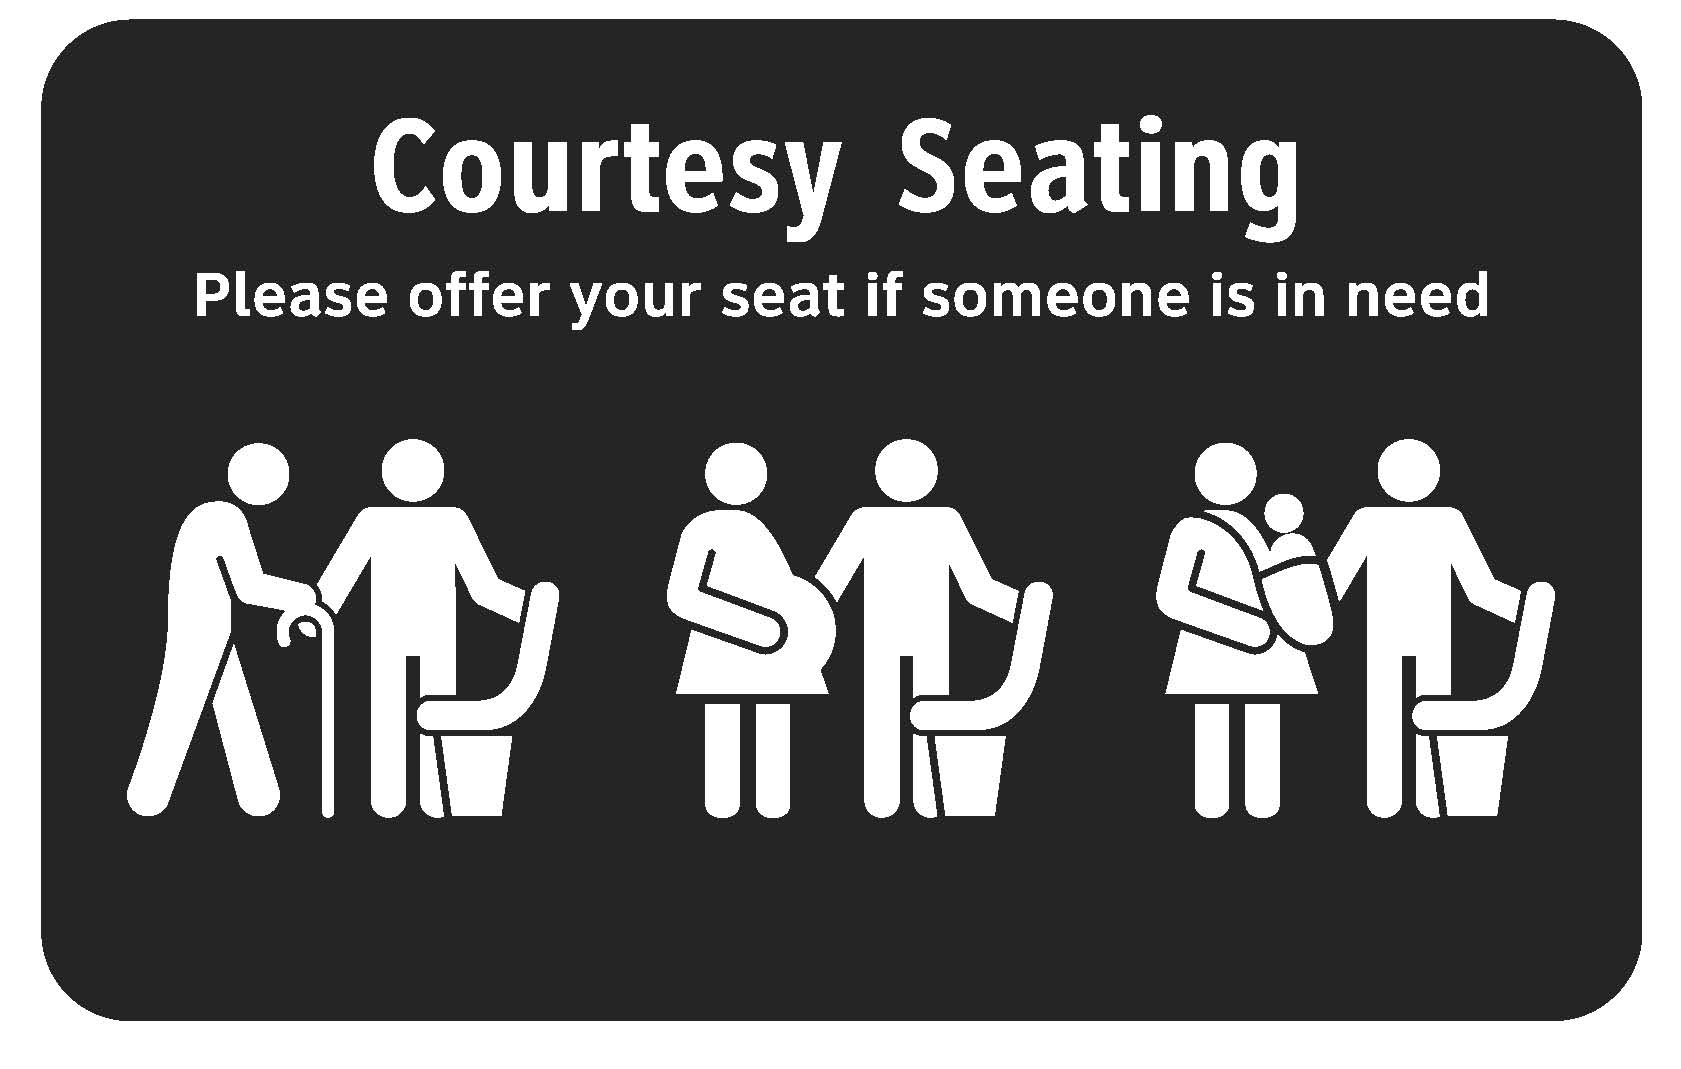 Graphic that shows icon of person with a cane, pregnant women, woman holding baby under the text "Courtesy Seating - Please offer your seat if someone is in need"